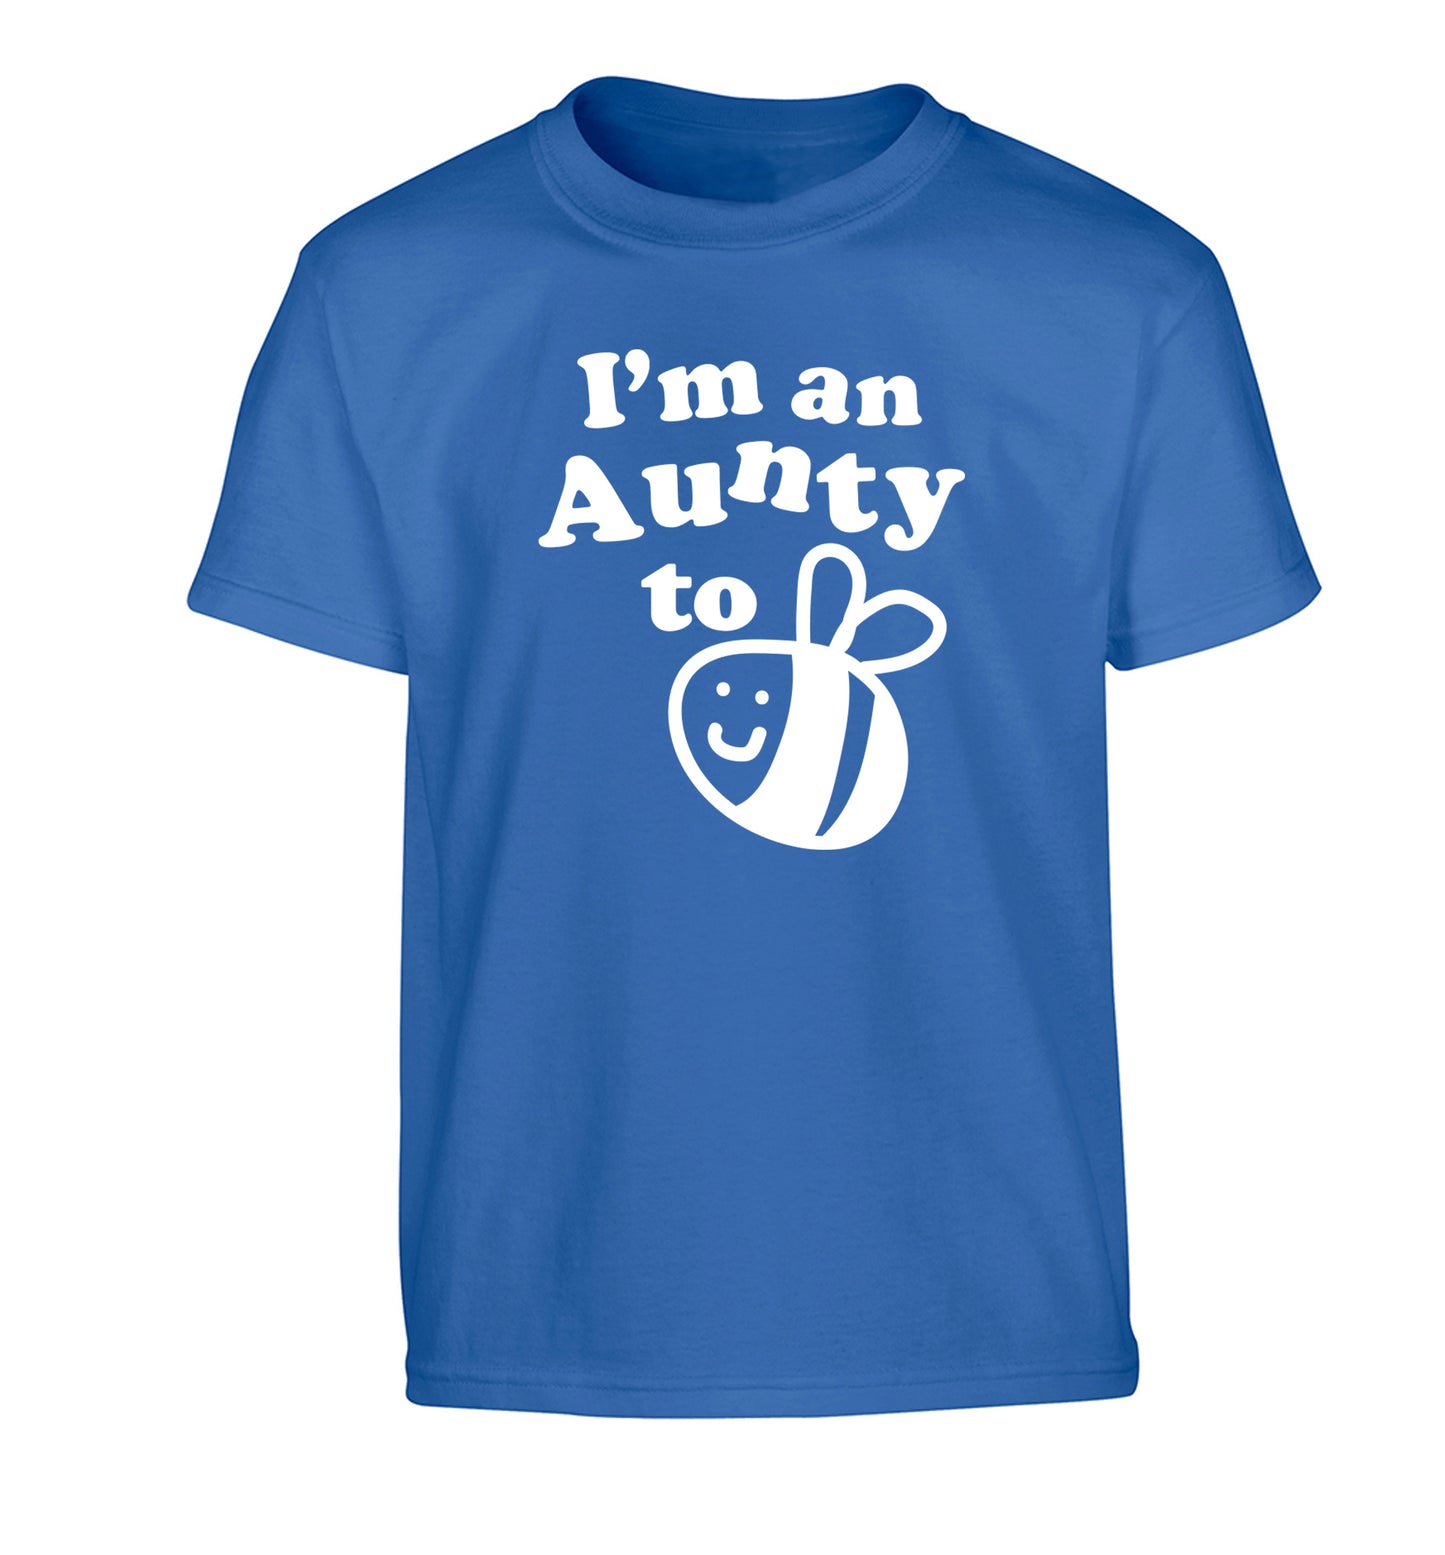 I'm an aunty to be Children's blue Tshirt 12-14 Years